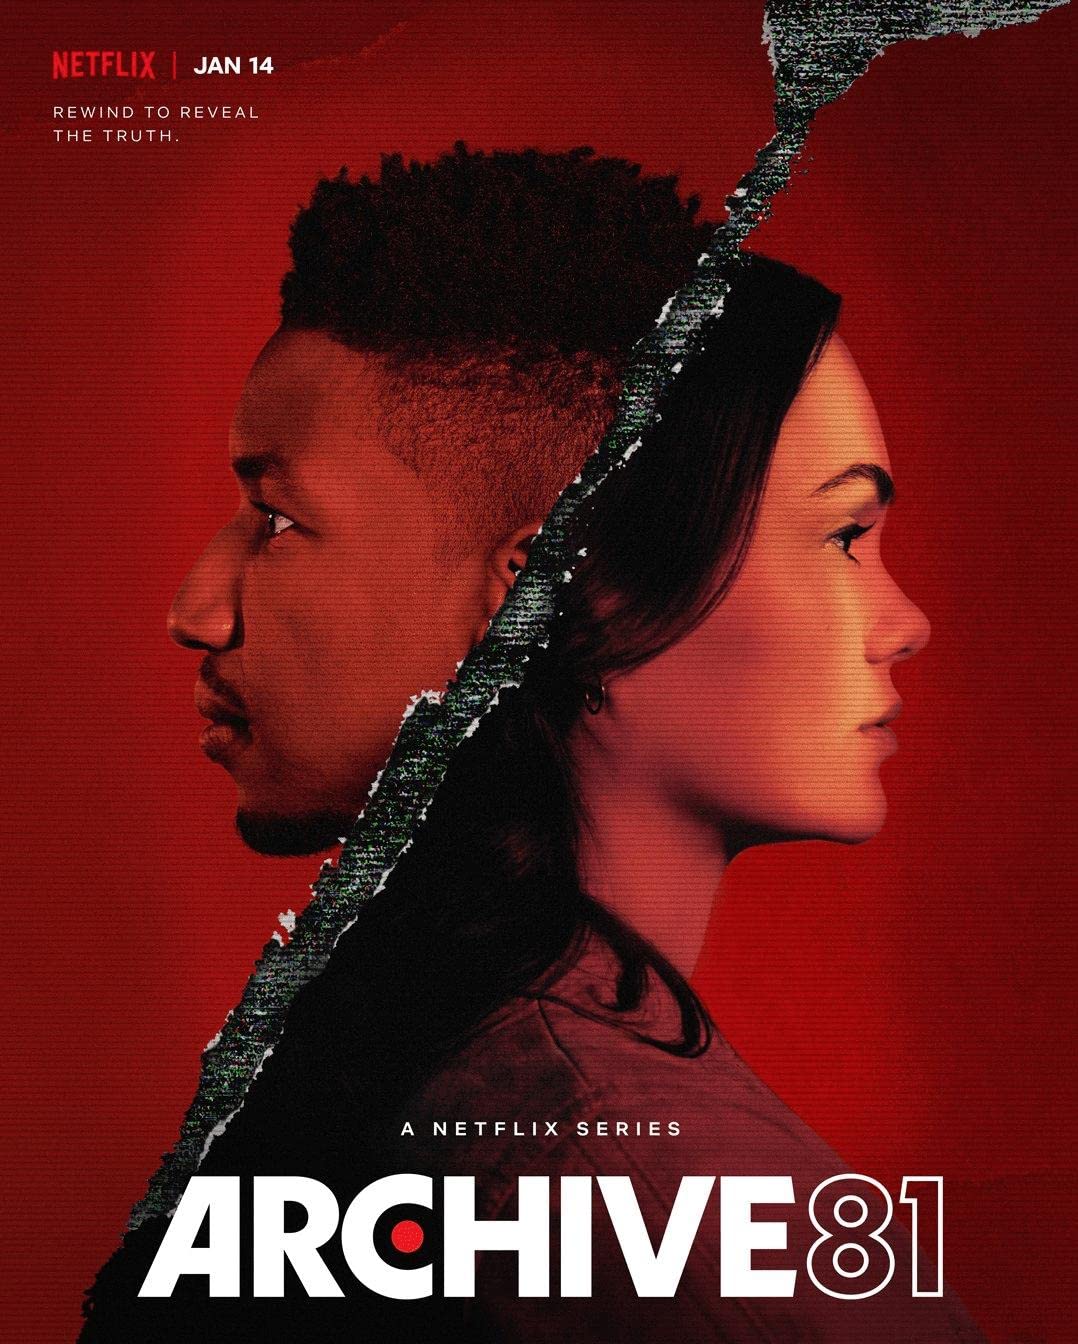 Archive 81 Trailer, Coming to Netflix in January 2022